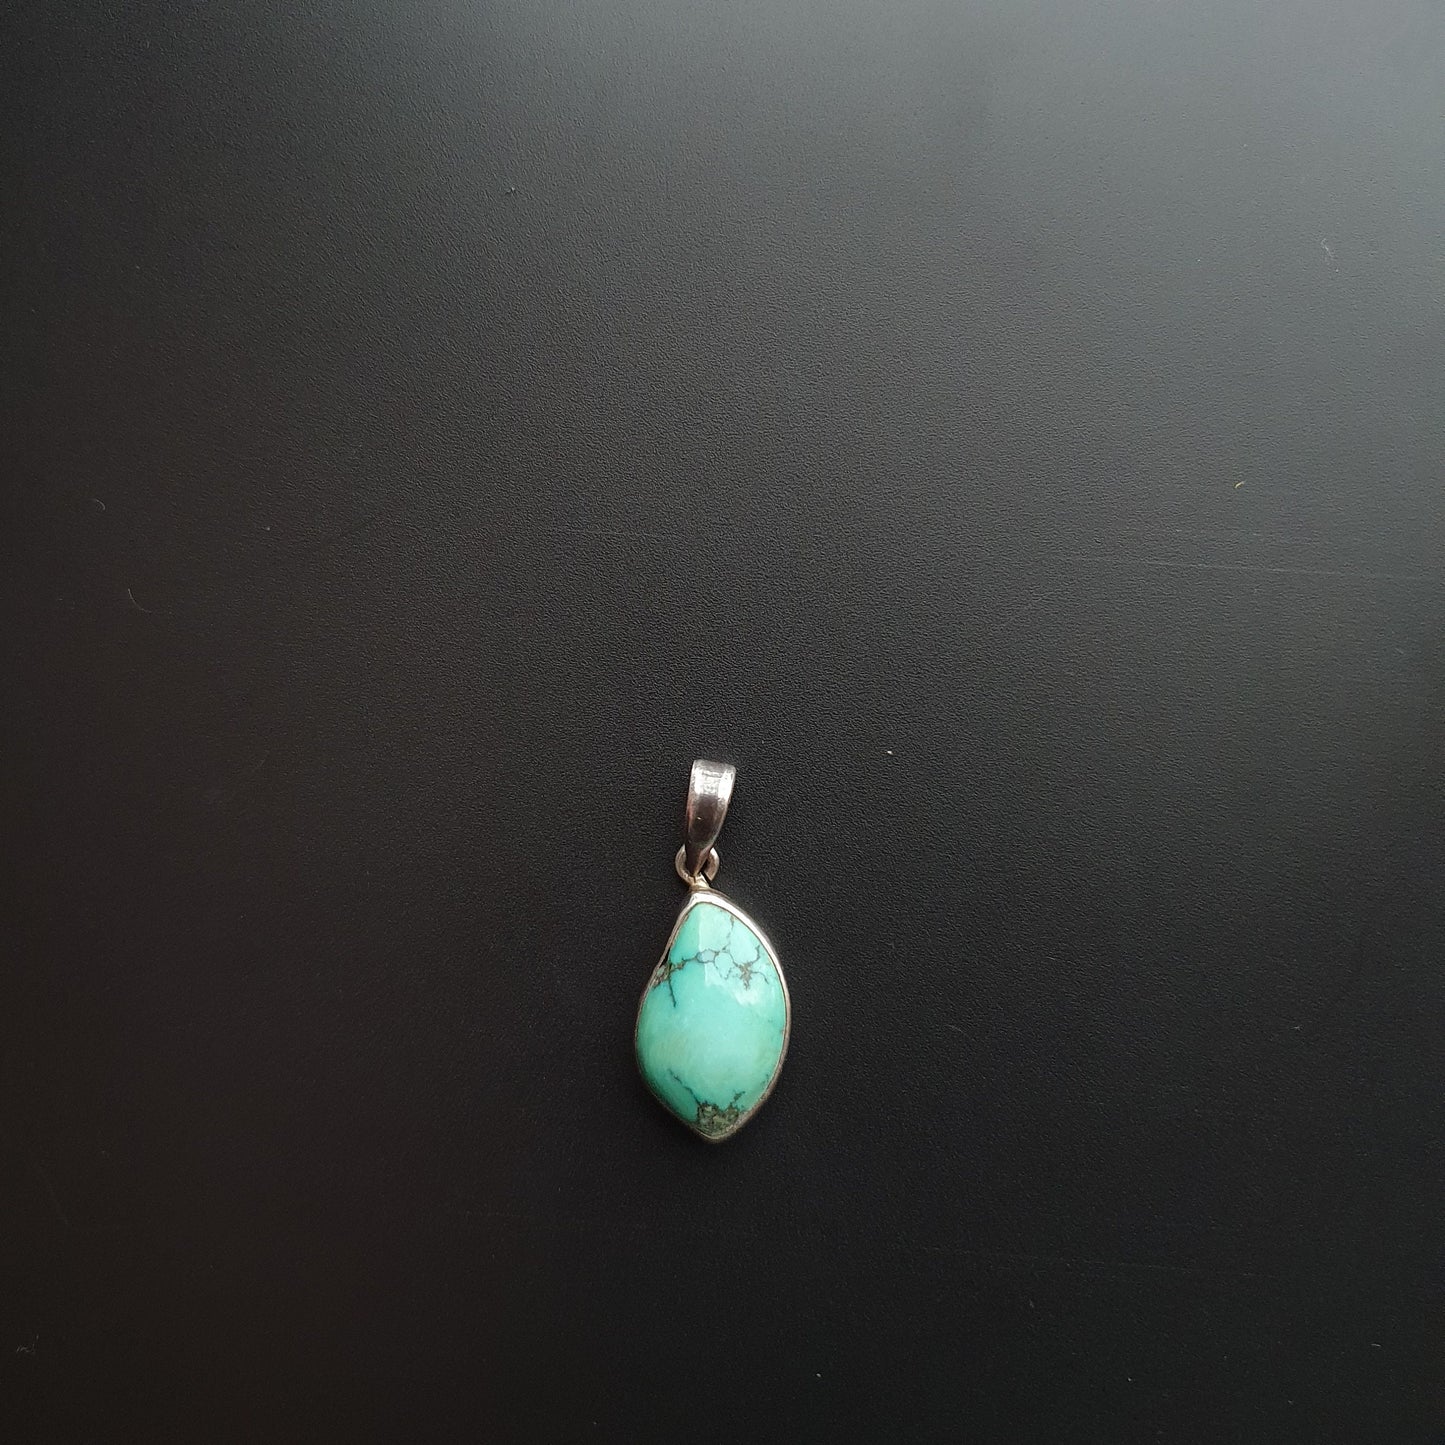 Turquoise pendant,Jewellery, Silver Pendant, Green Turquoise gemstone, Sterling Silver Vintage Pendant Necklace, Gift,marquise Gemstone Pend